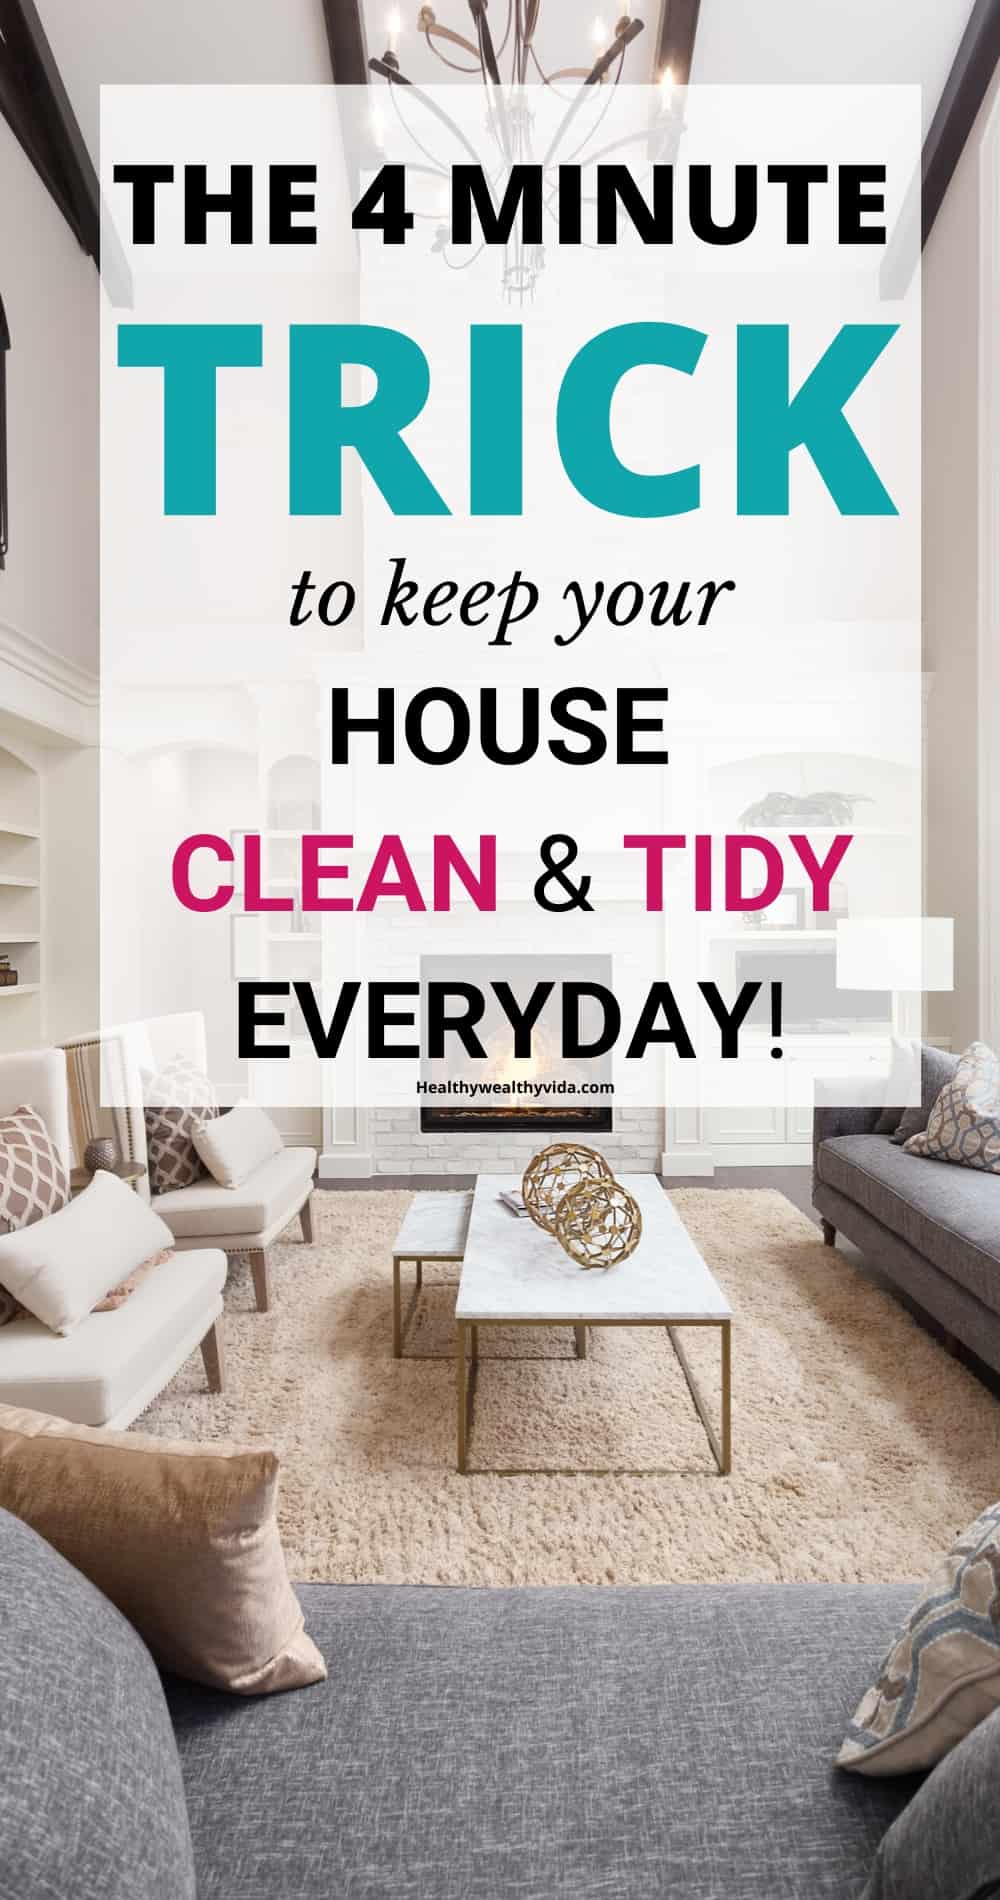 How to keep your home clean and tidy everyday in 4 minutes